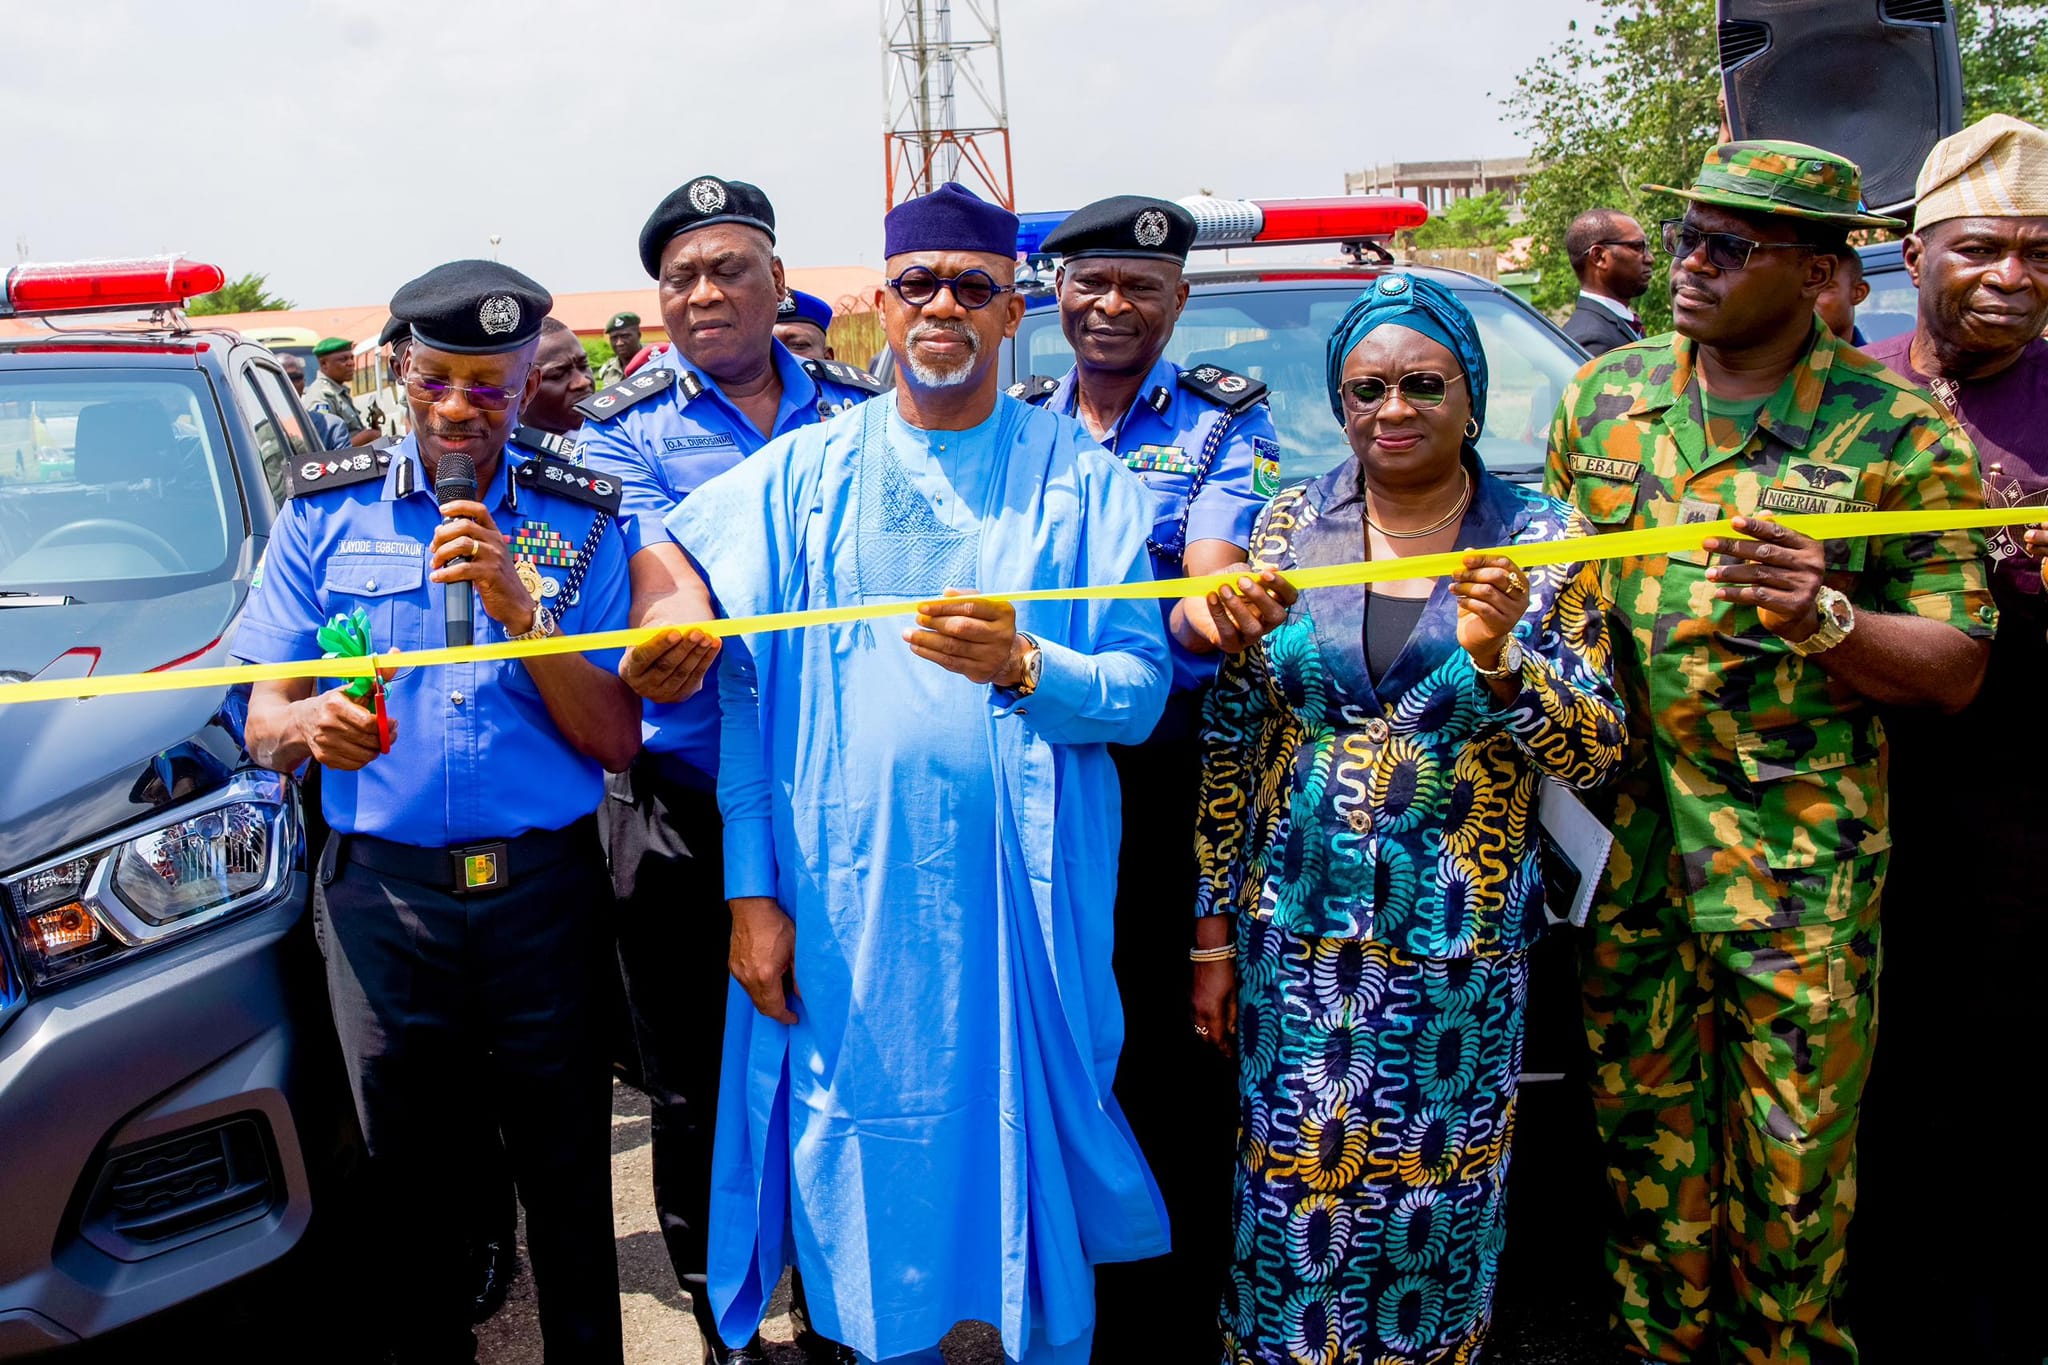 ABIODUN DONATES 25 PATROL VEHICLES TO TACKLE INSECURITY